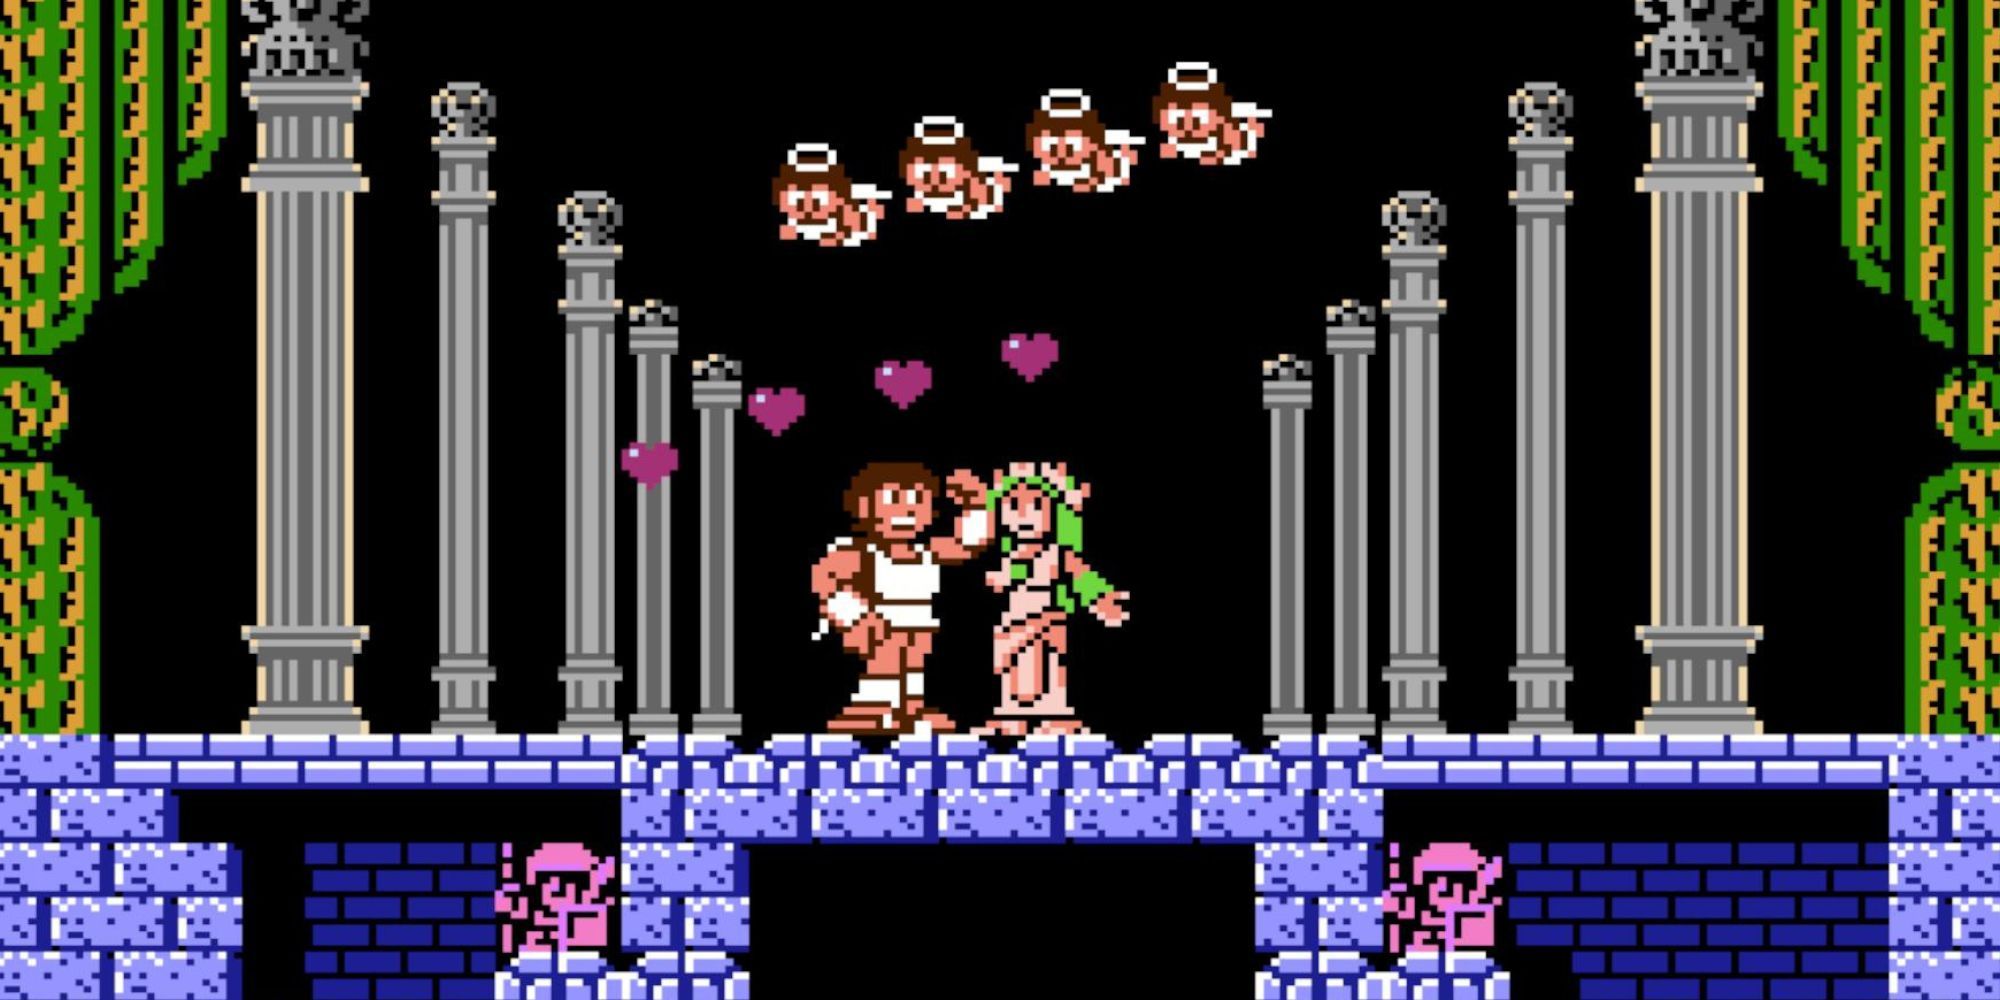 Pit stands beside Palutena as angels fly over their heads